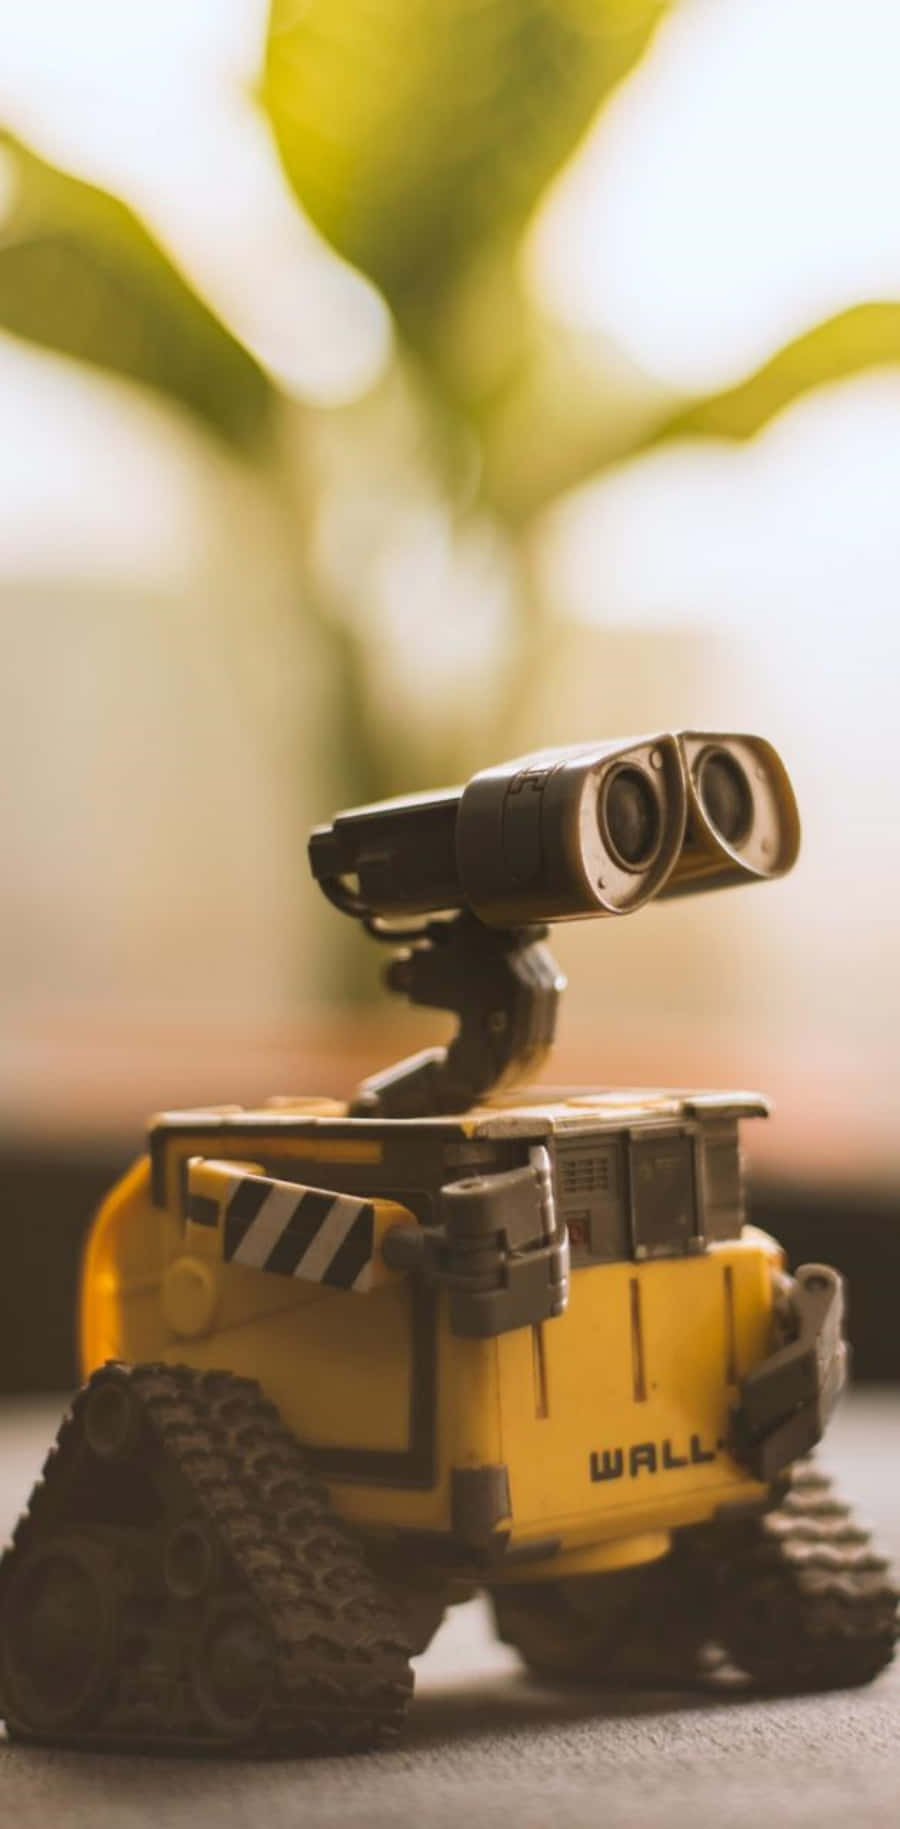 Wall E Iphone Action Figure Toy Wallpaper